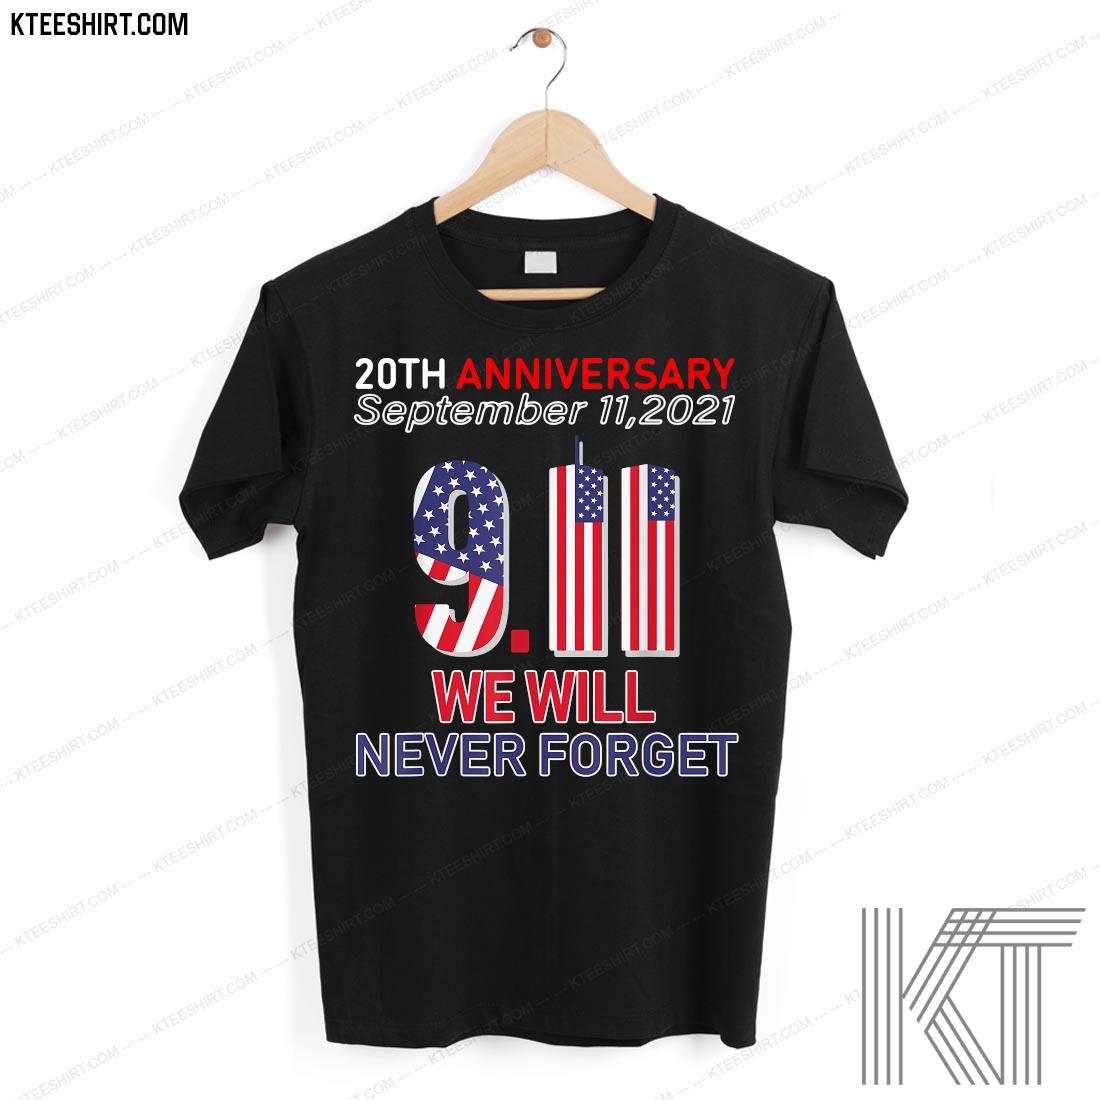 20Th Anniversary September 11 - 2021 We Will Never Forget Patriot Day 2021 T-Shirt